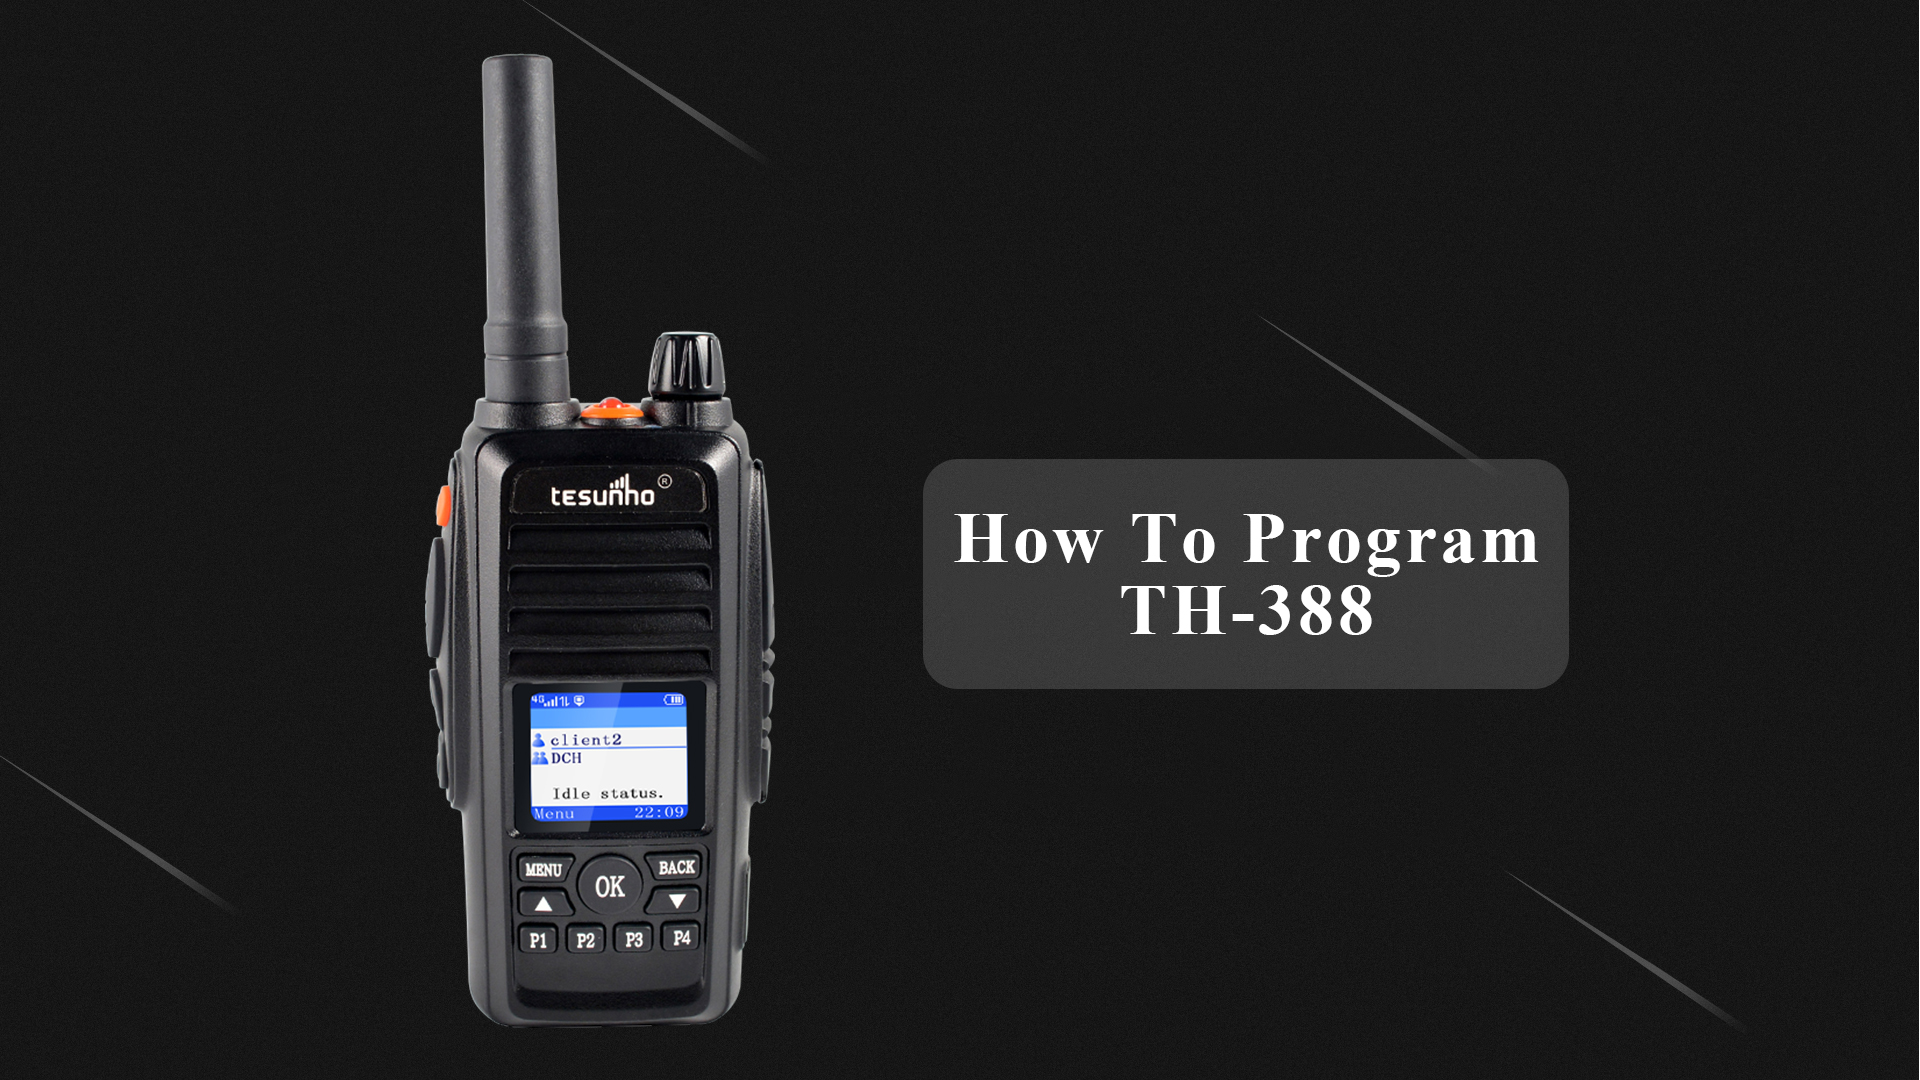 How To Program TH-388